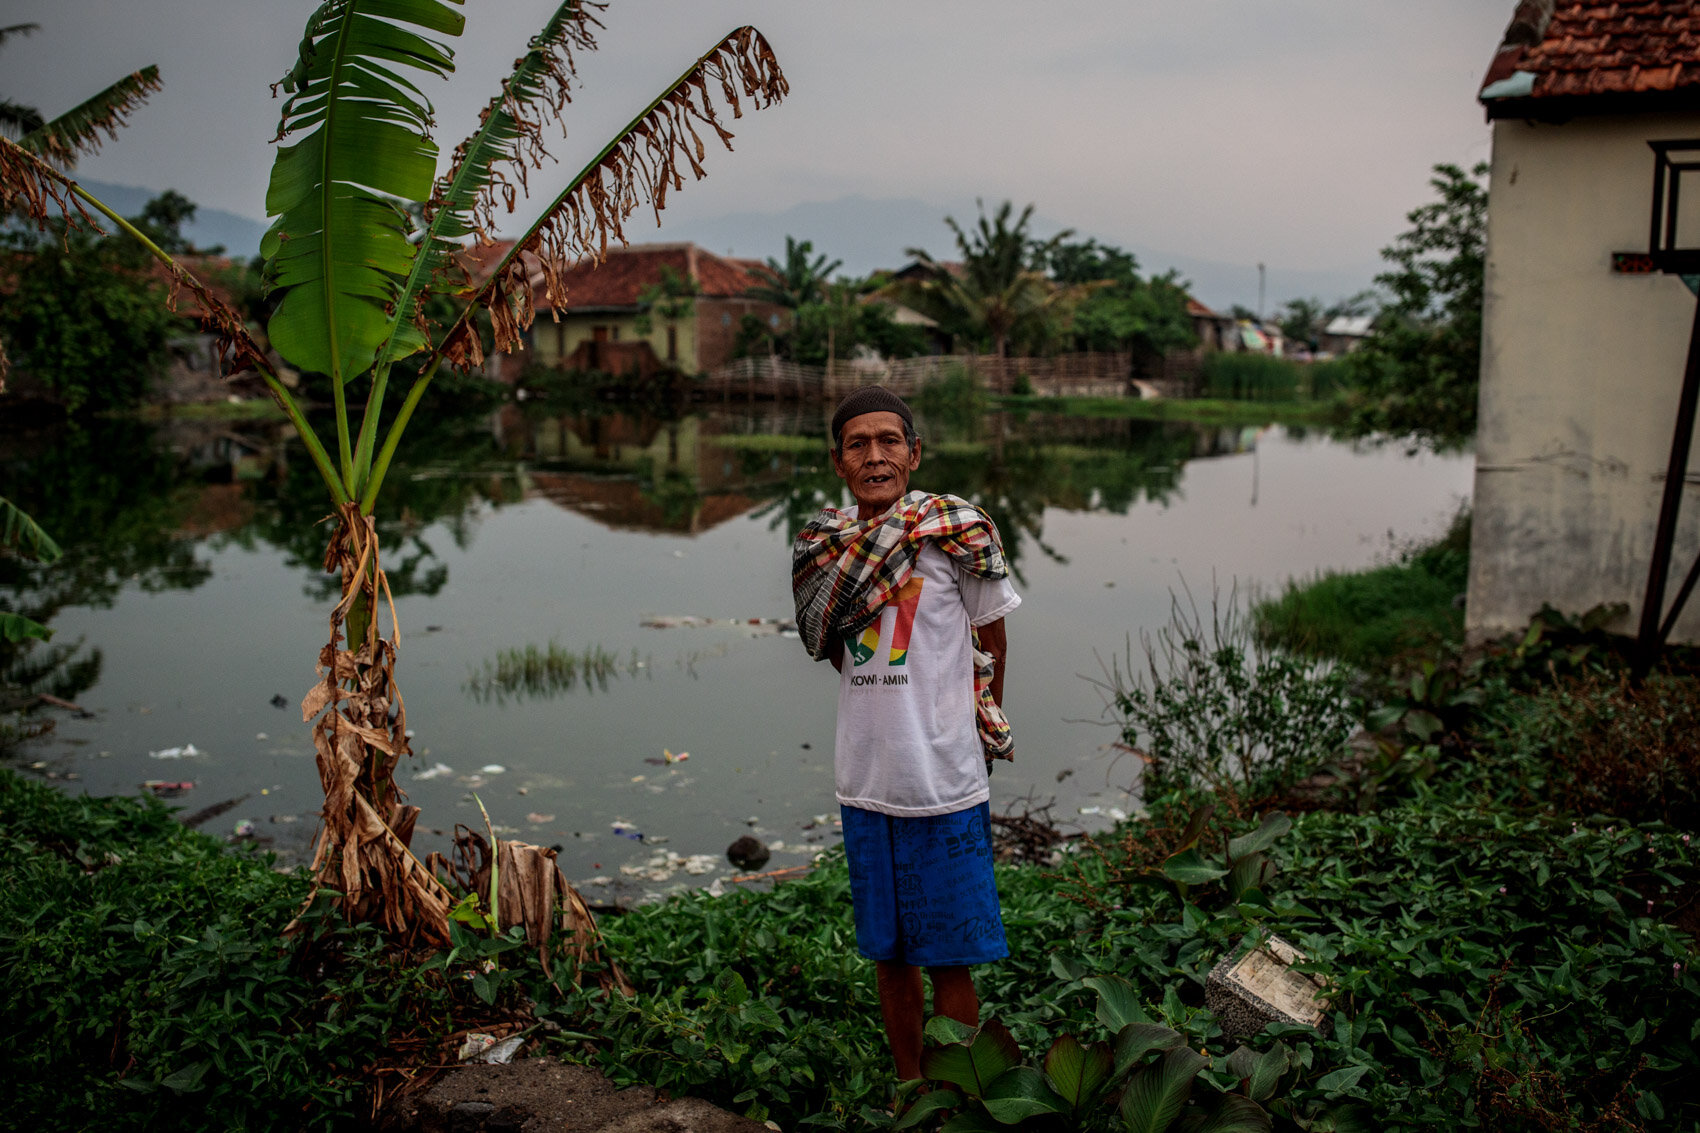  BANDUNG, INDONESIA: Former farmer Ade Traguna, 65, stands by his land, on which he can no longer grow crops as a result of the toxic water from the Citarum that was used to irrigate his rice paddies, in Jelegong village on November 23, 2019 in Bandu